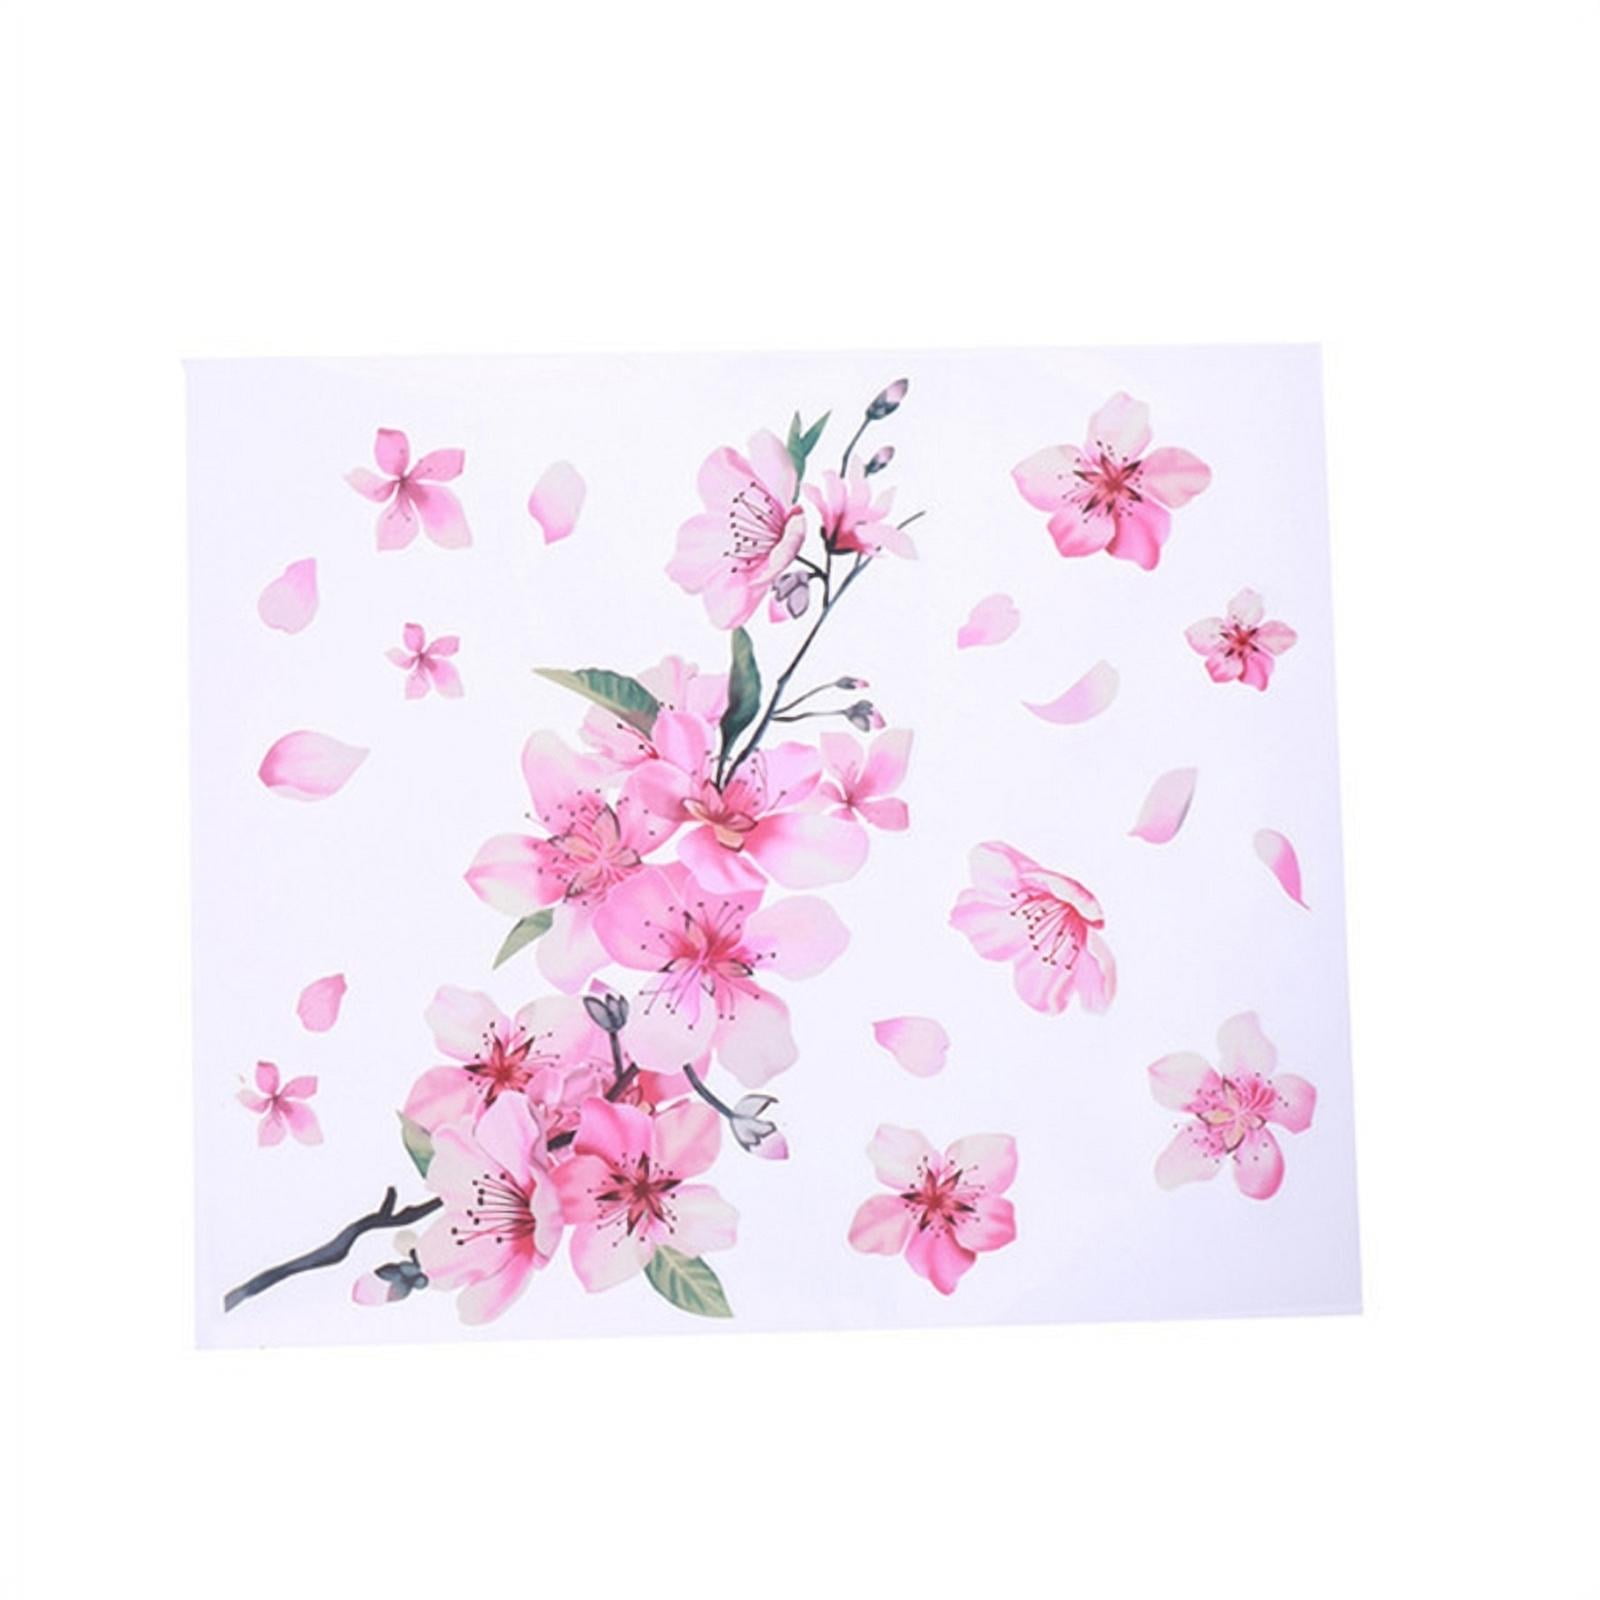 Rustic Pink Cherry Blossom Favor Stickers – Artistically Invited